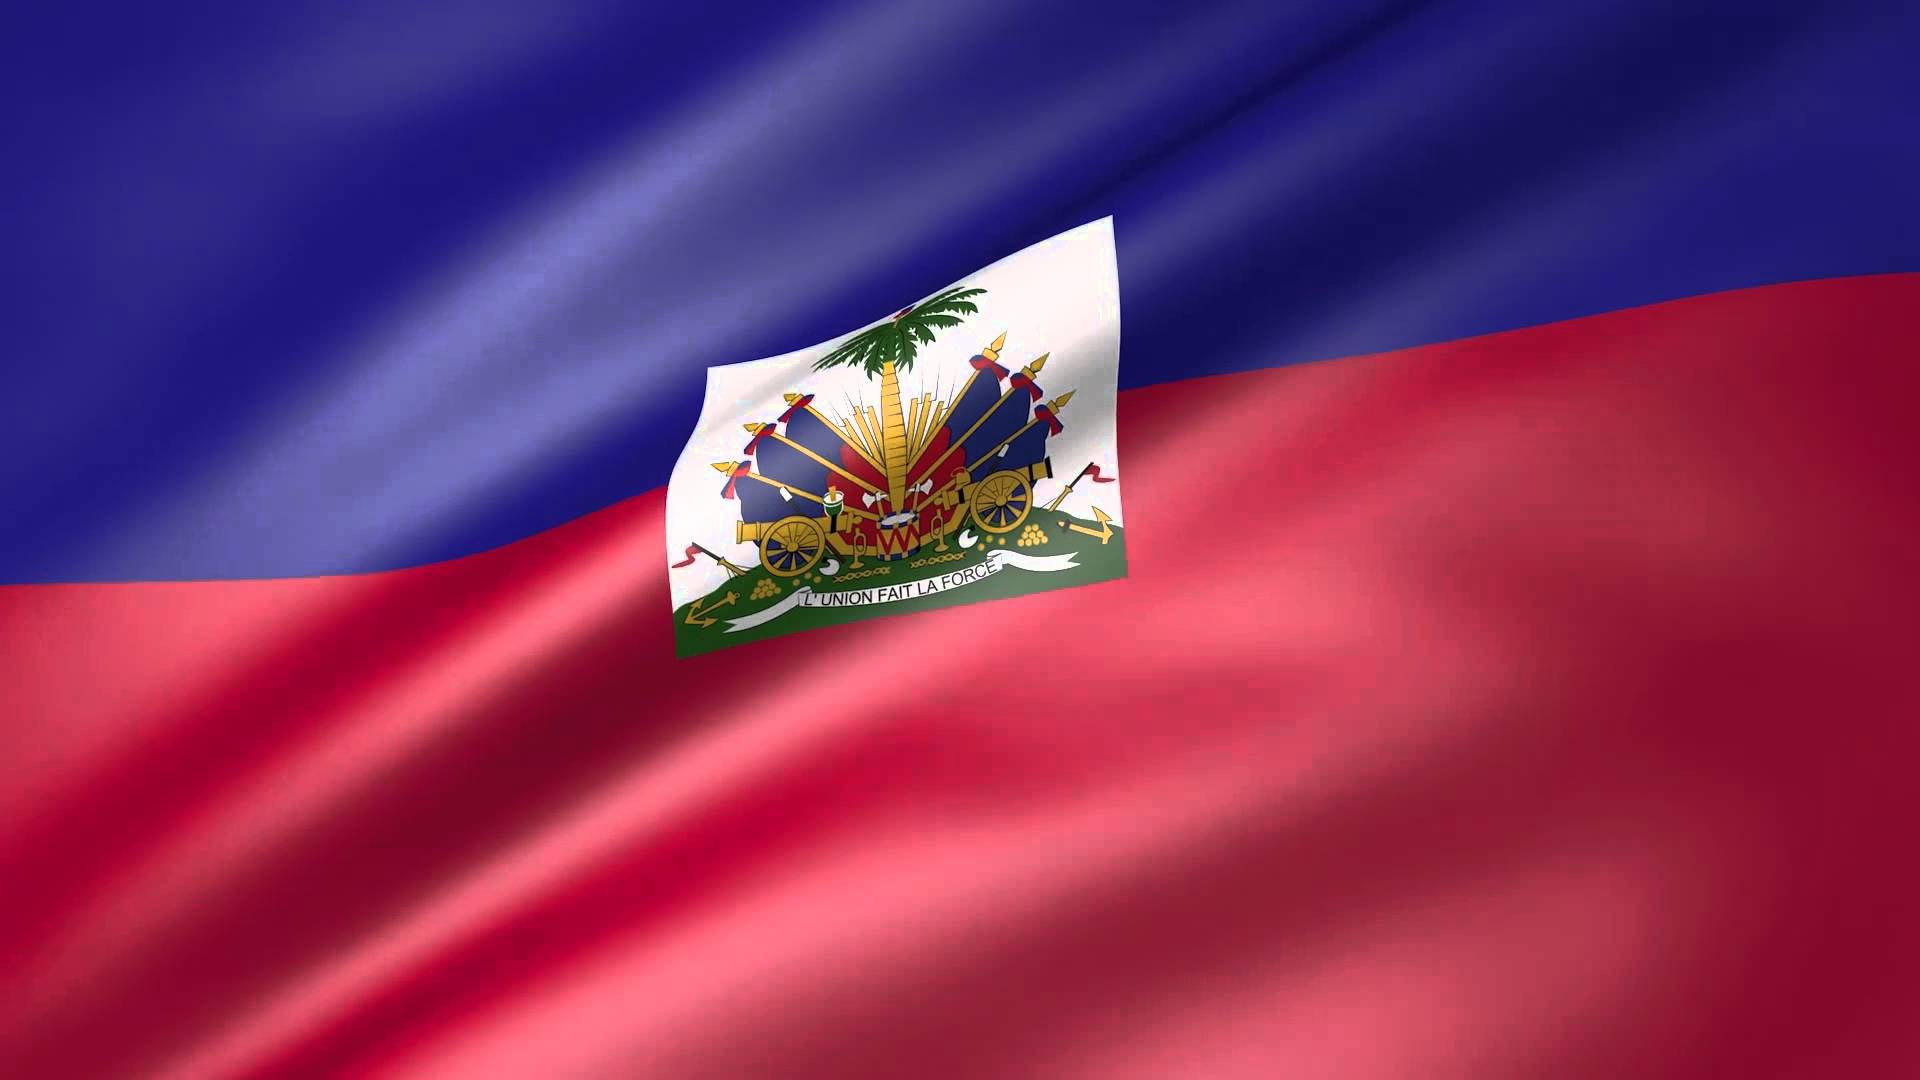 Haitian Flag Wallpaper, image collections of wallpaper